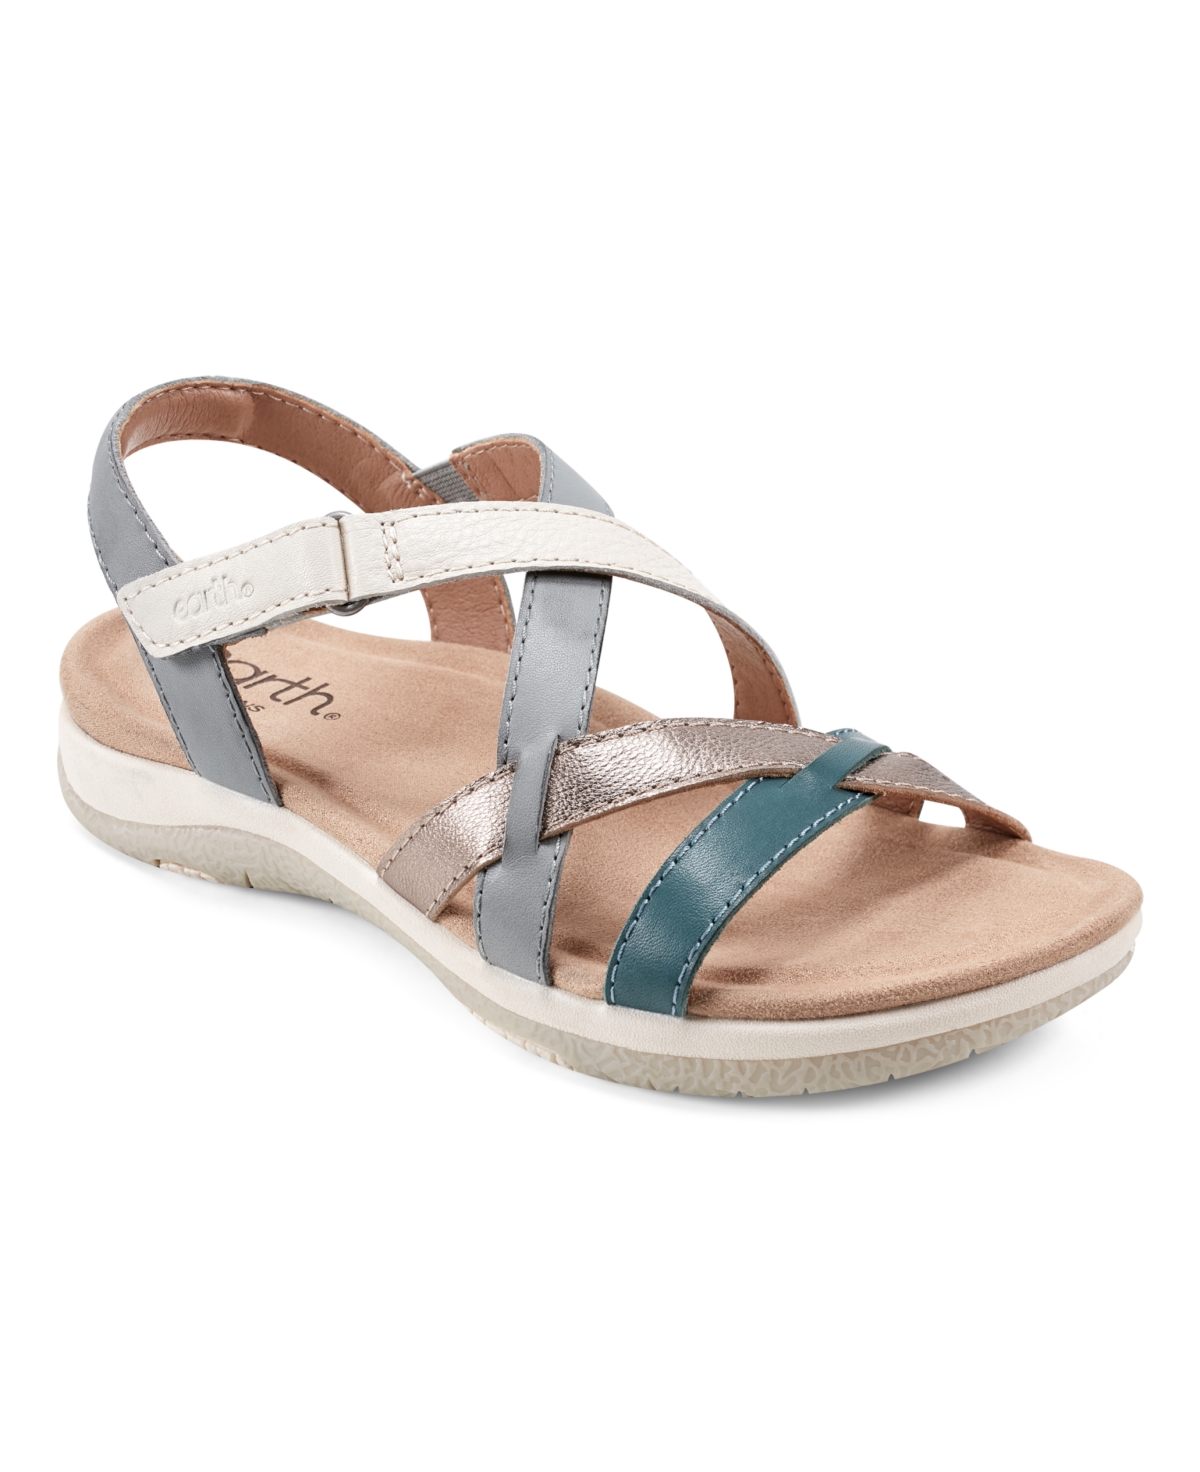 Earth Women's Sterling Strappy Flat Casual Sport Sandals - Light Natural, White Multi Leather